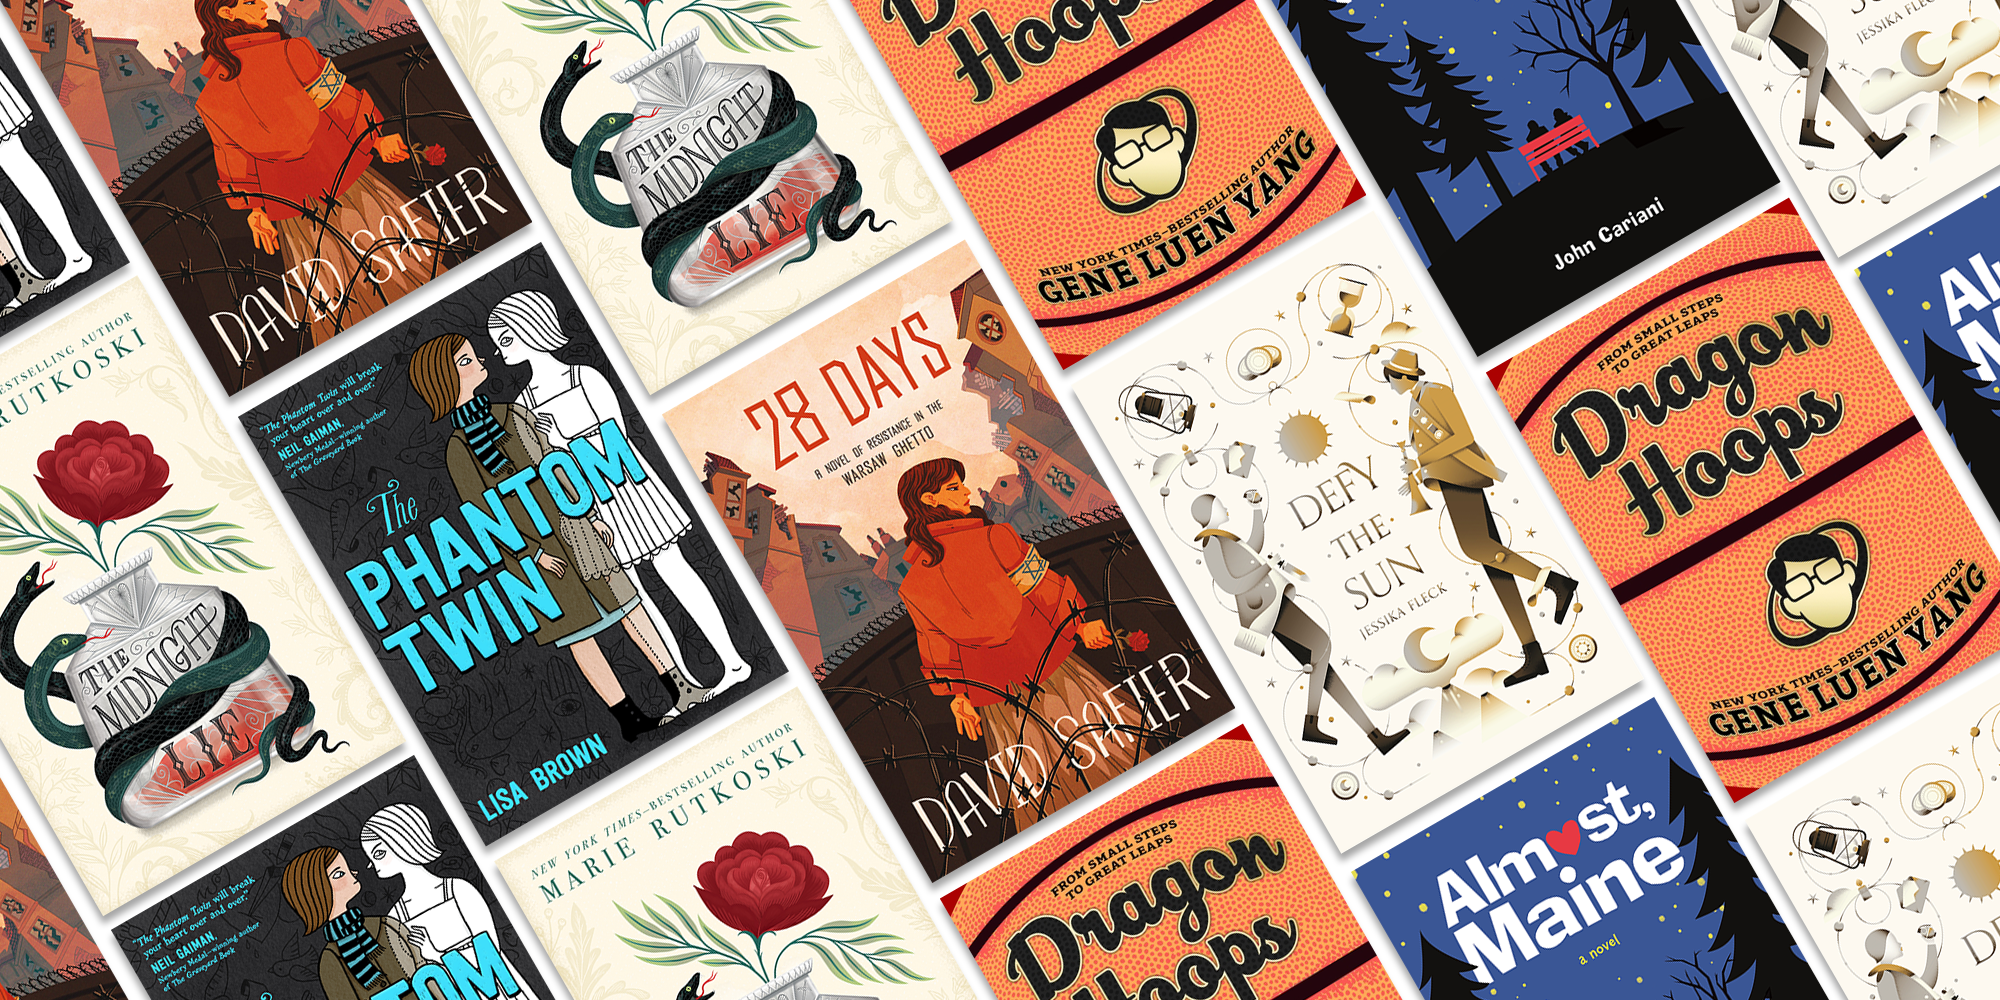 6 Amazing New March Books for Your Bookshelf